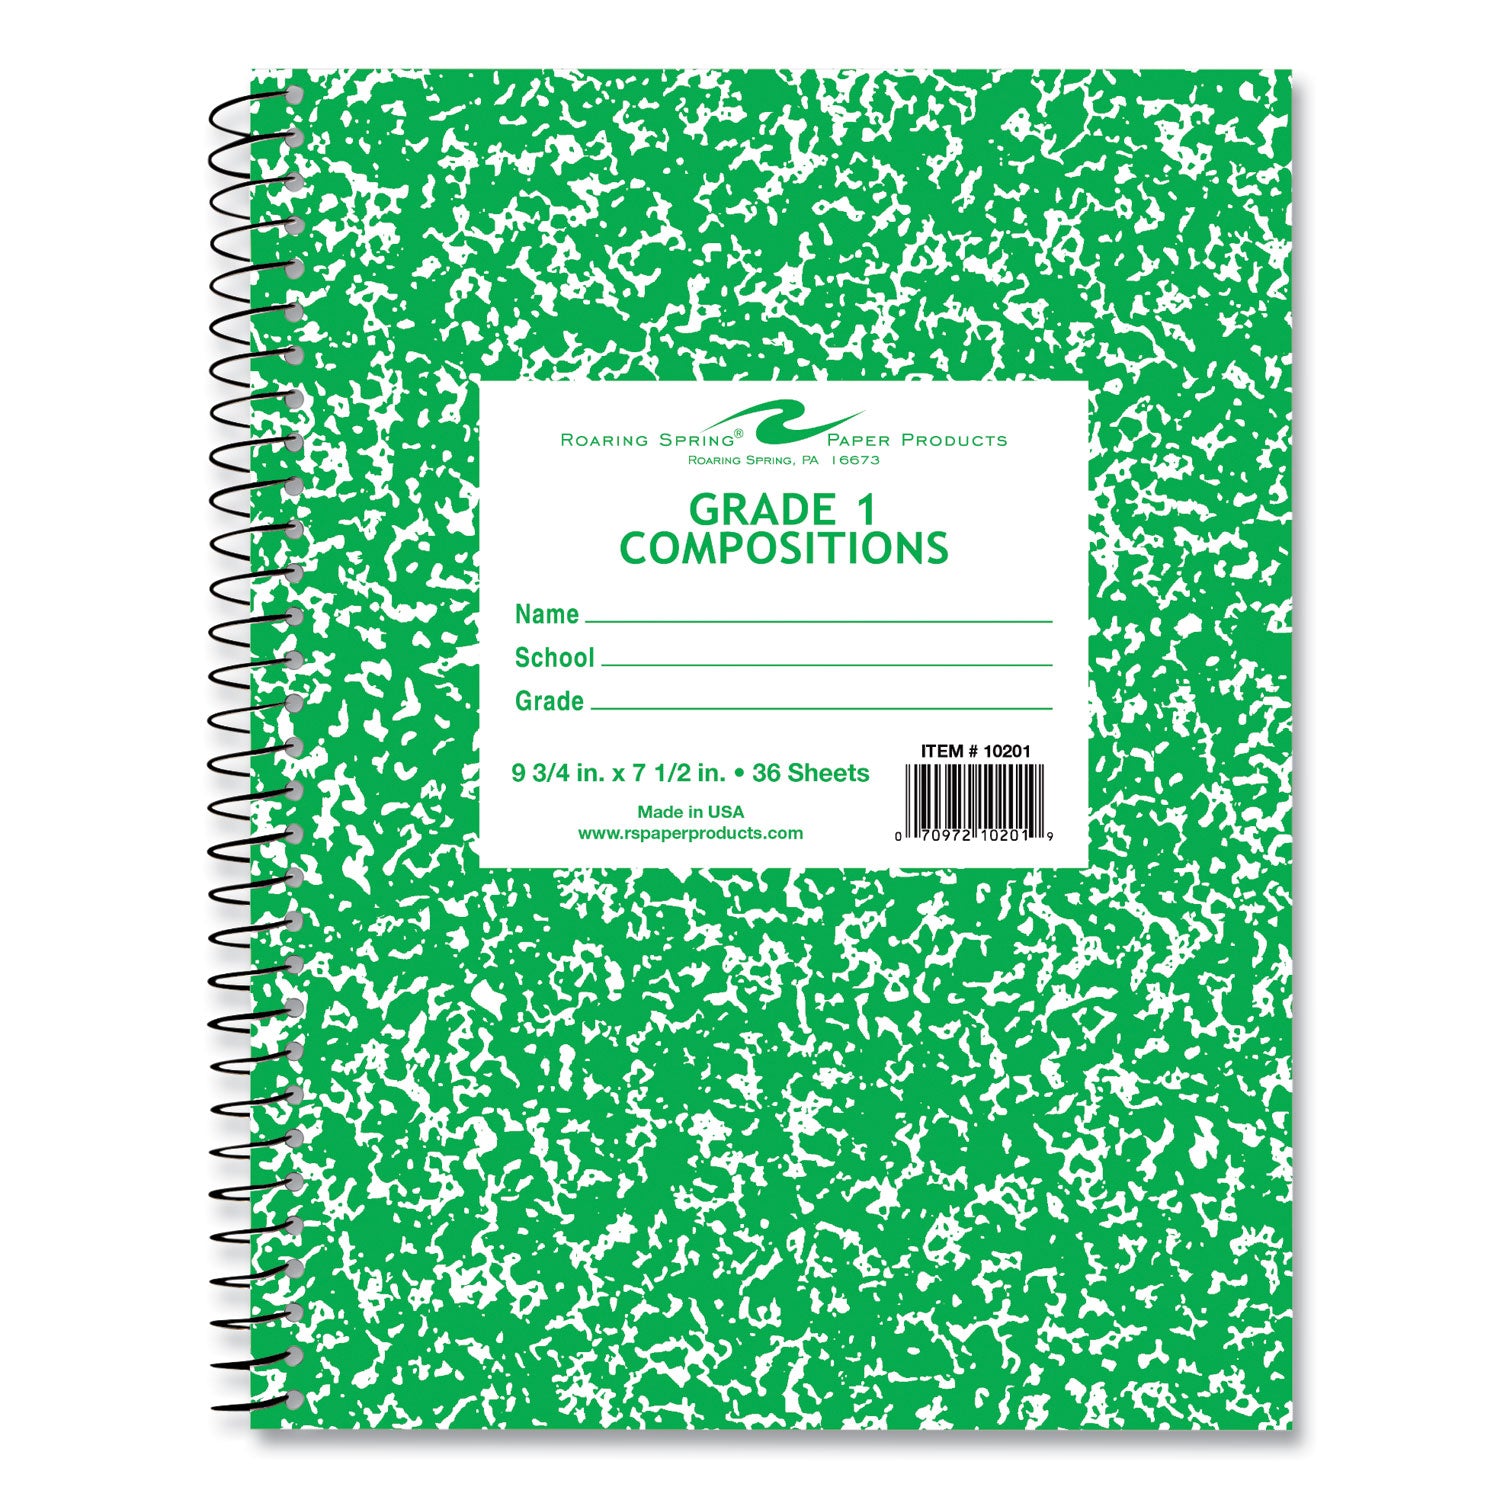 wirebound-composition-book-1-subject-manuscript-format-green-cover-36-975-x-75-sheet-48-ct-ships-in-4-6-bus-days_roa10201cs - 2